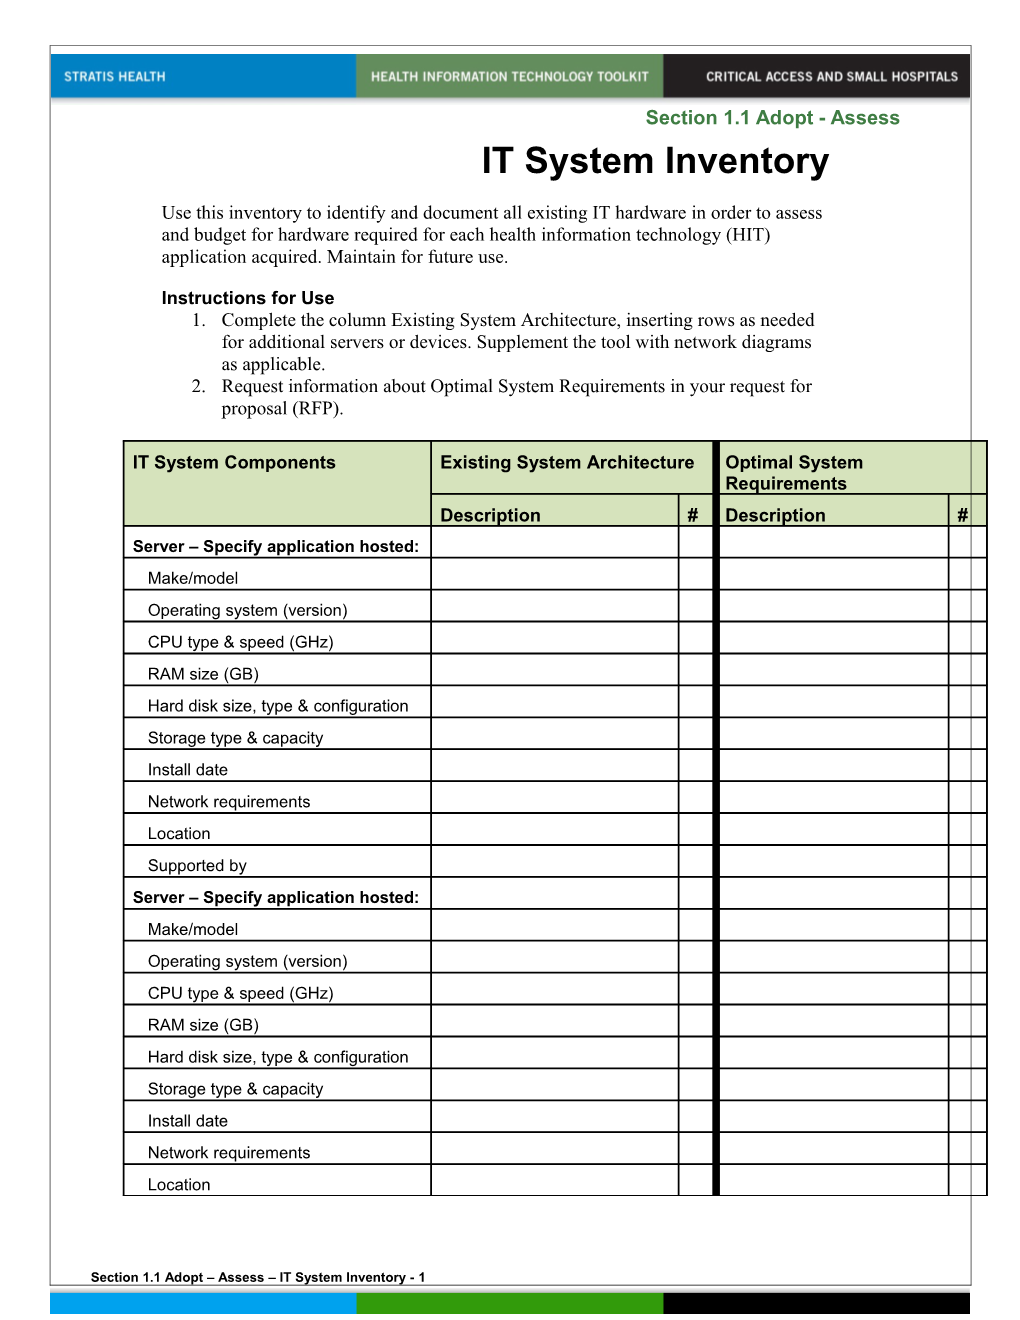 IT System Inventory